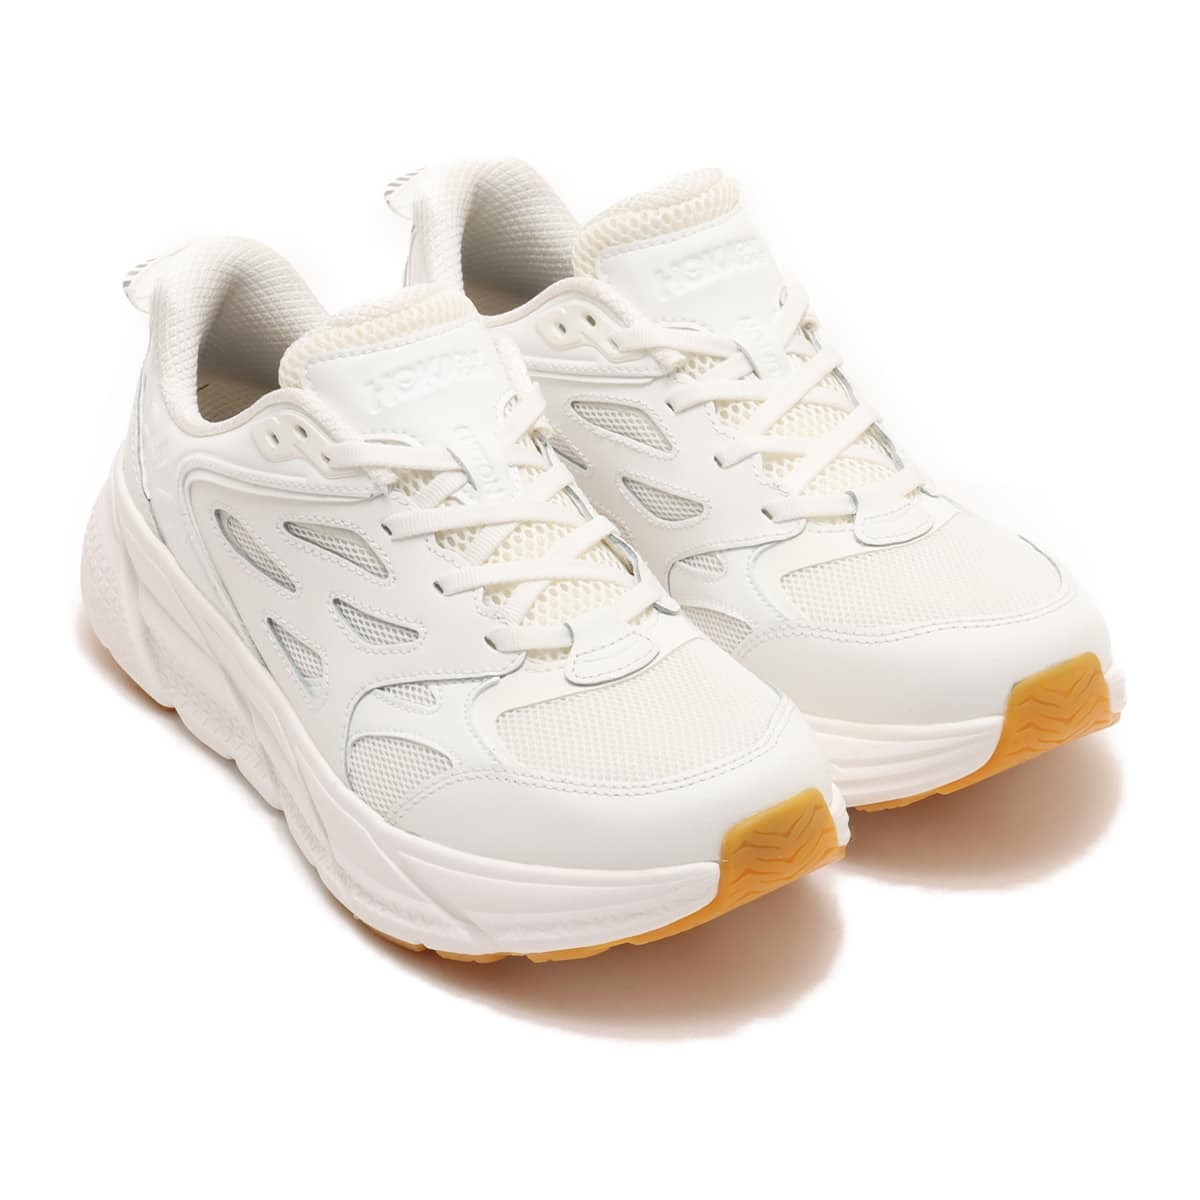 HOKA ONE ONE's Clifton Athletics sneaker in white and black leather colorways